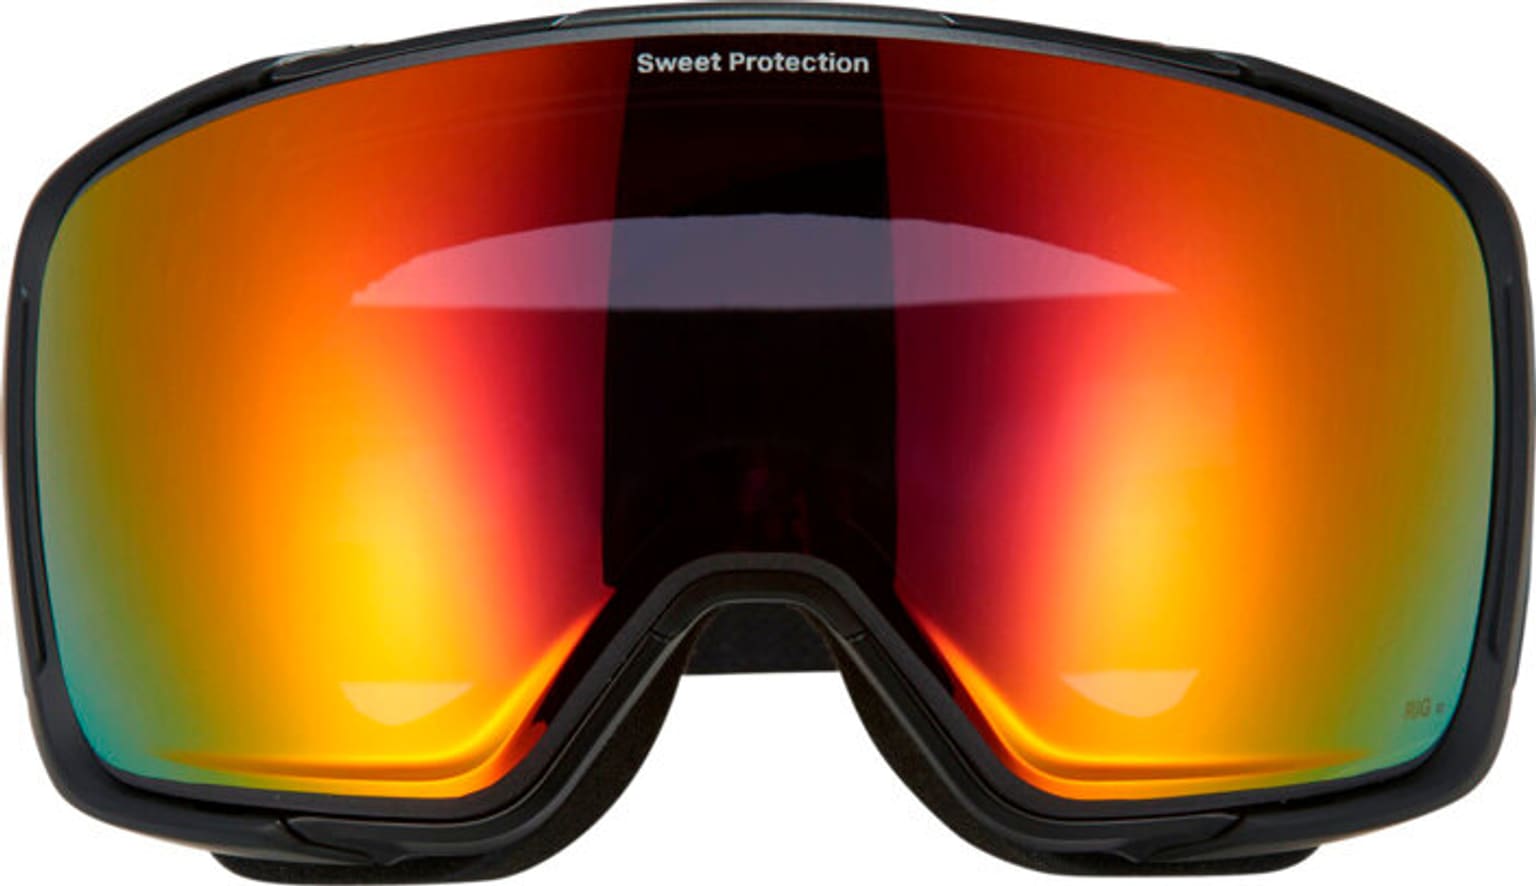 Sweet Protection Sweet Protection Interstellar RIG Reflect with Extra Lens Skibrille schwarz 2